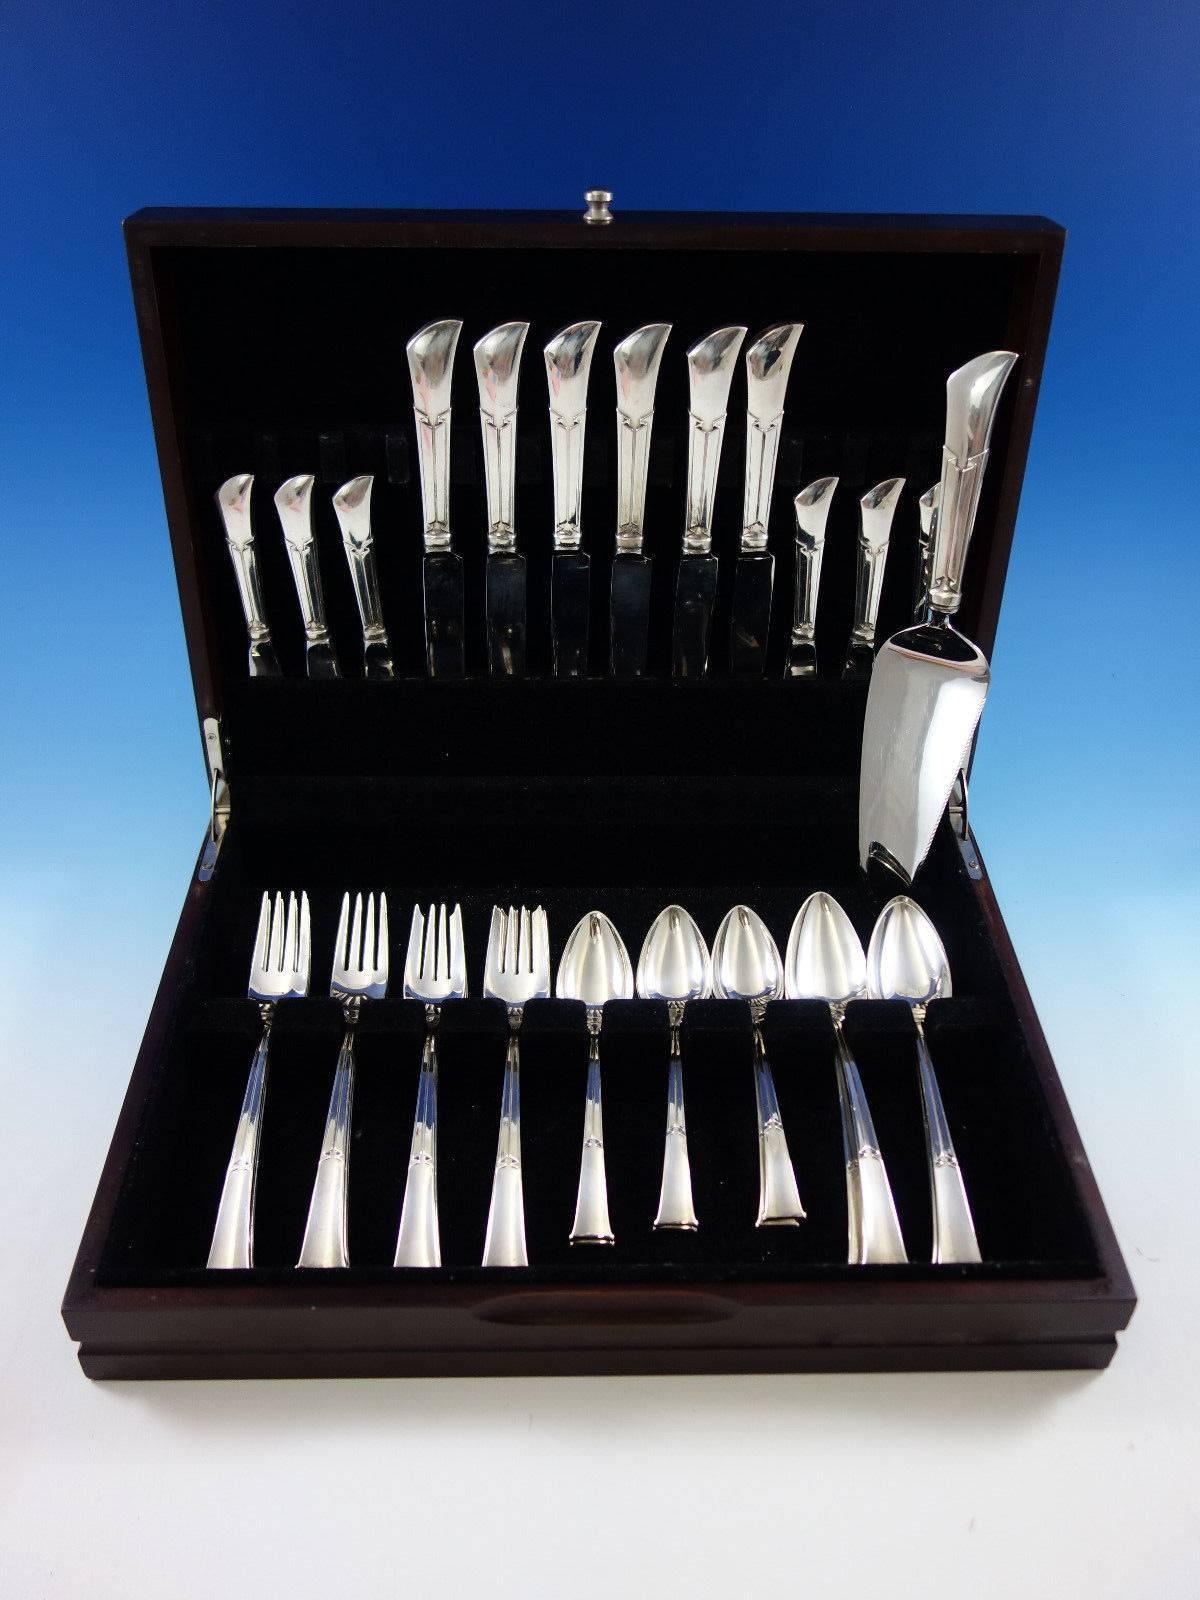 Linenfold by Tiffany and co. sterling silver flatware set - 37 pieces. Great starter set! This set includes: six knives, 9